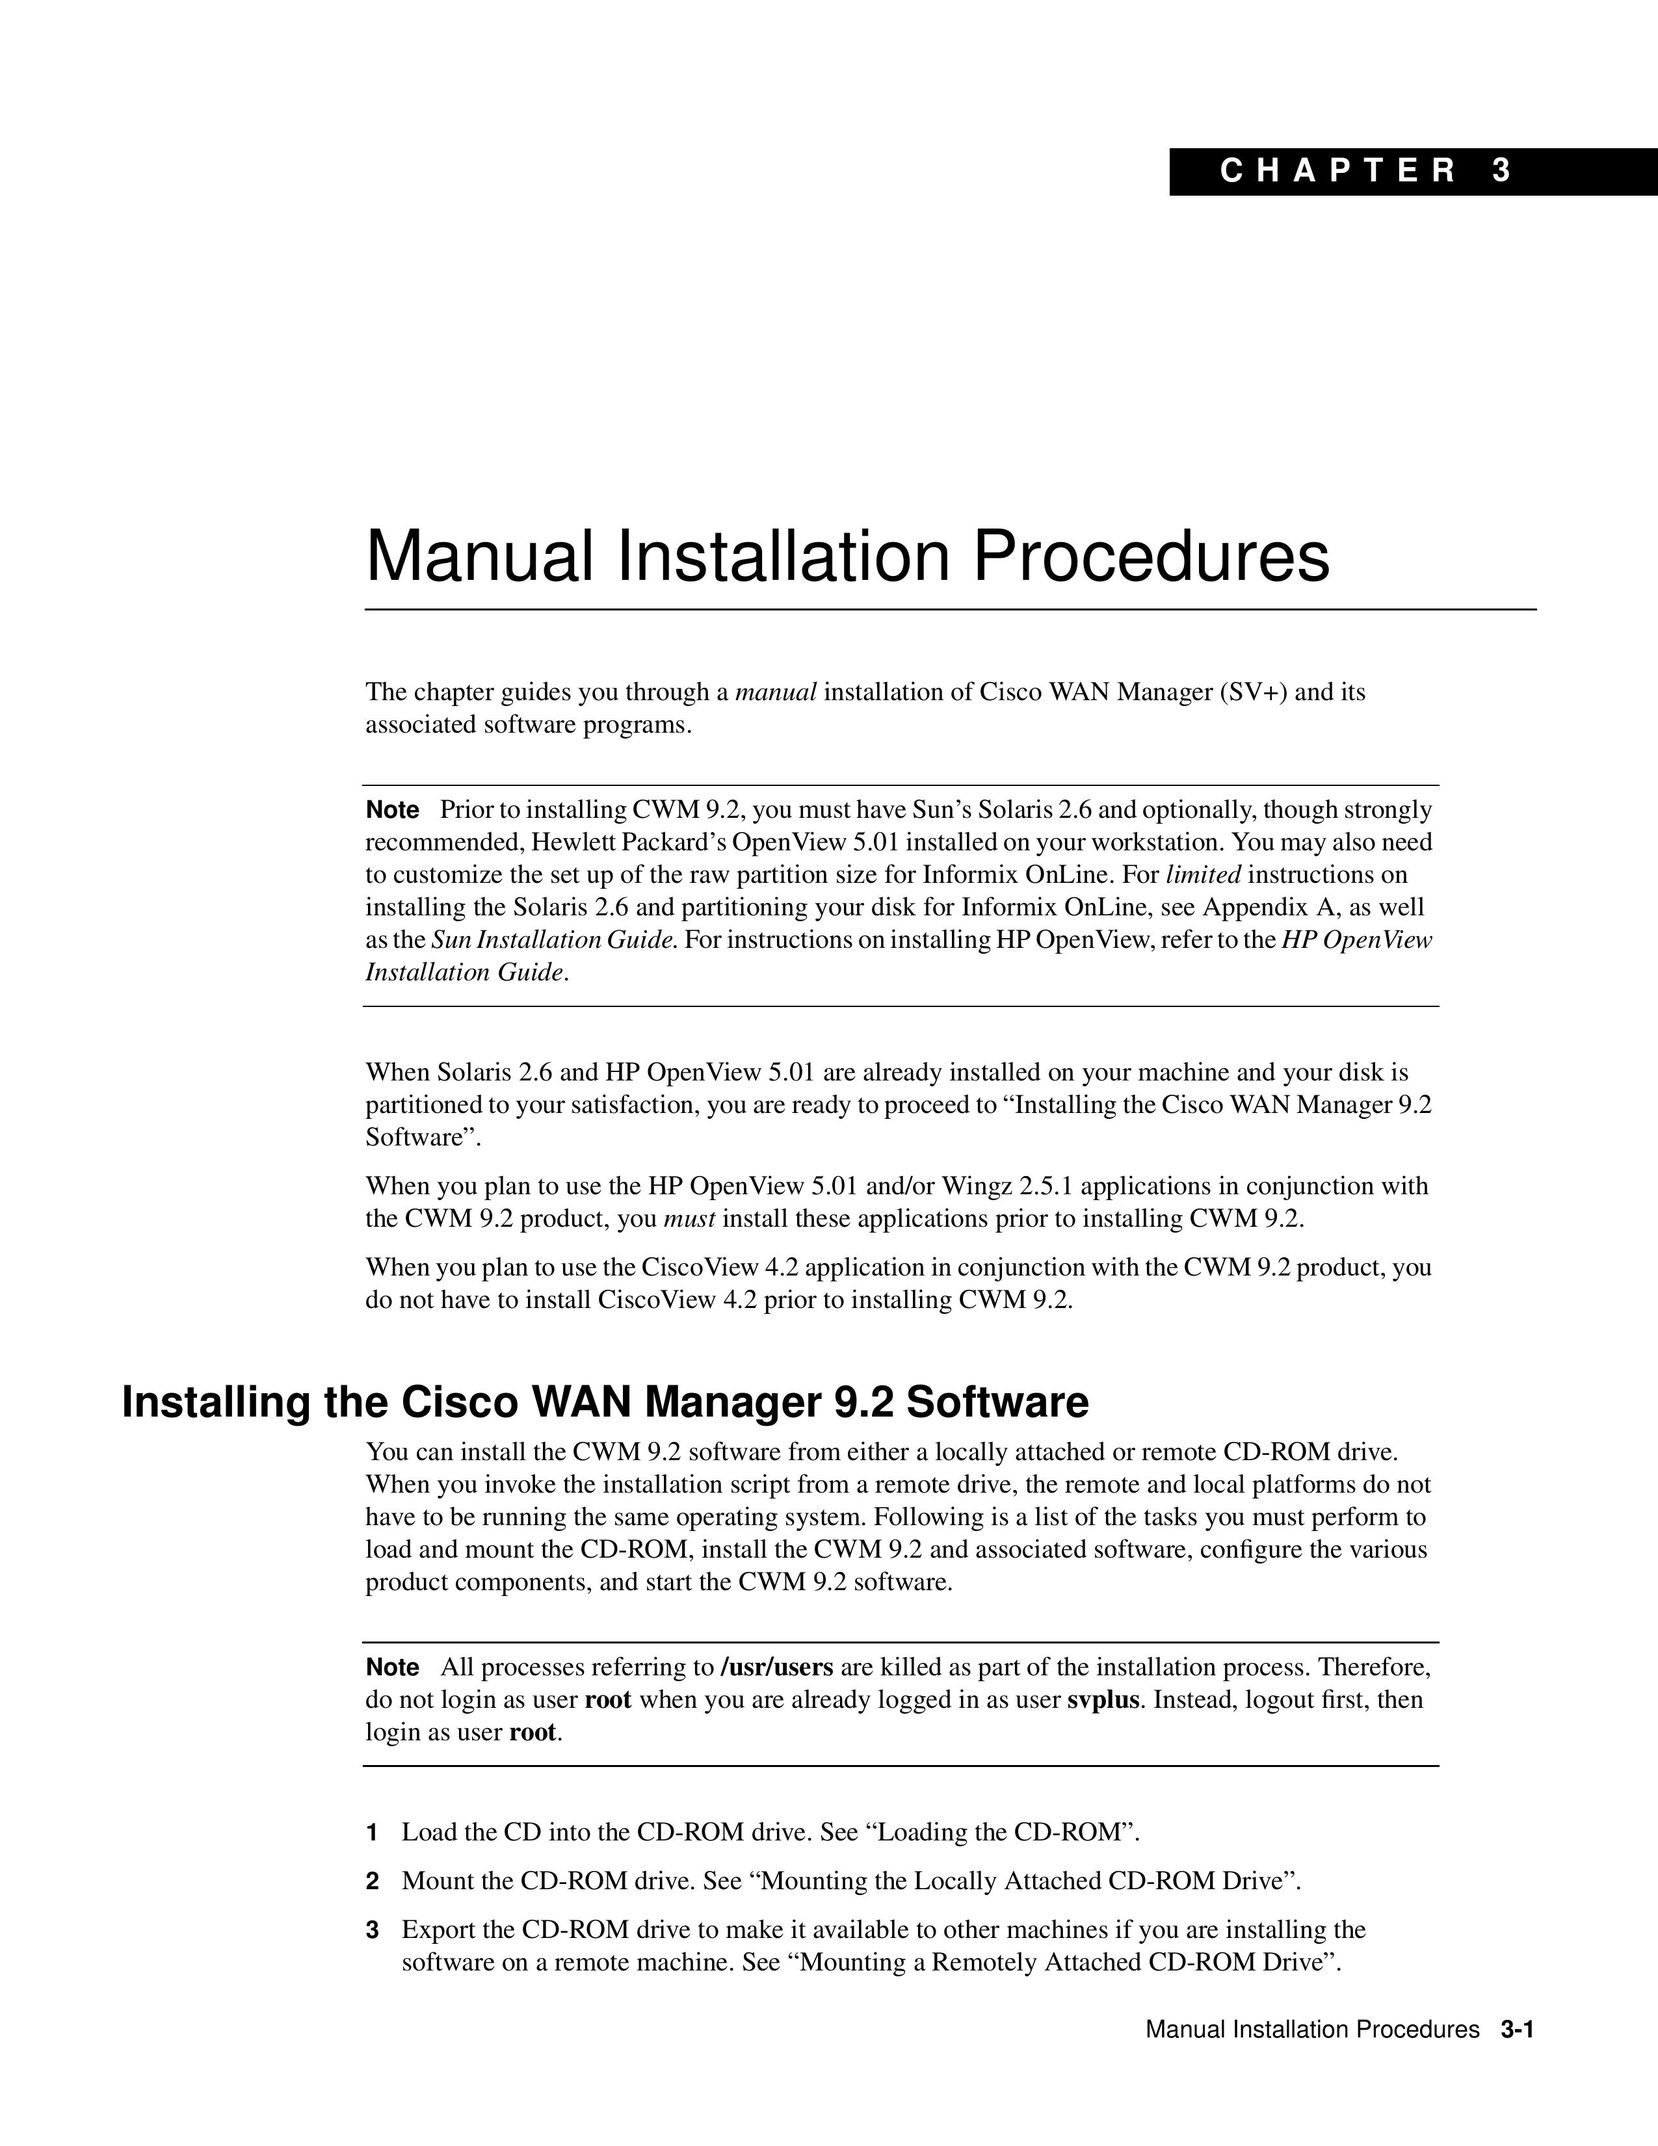 Cisco Systems CWM 9.2 Pet Fence User Manual